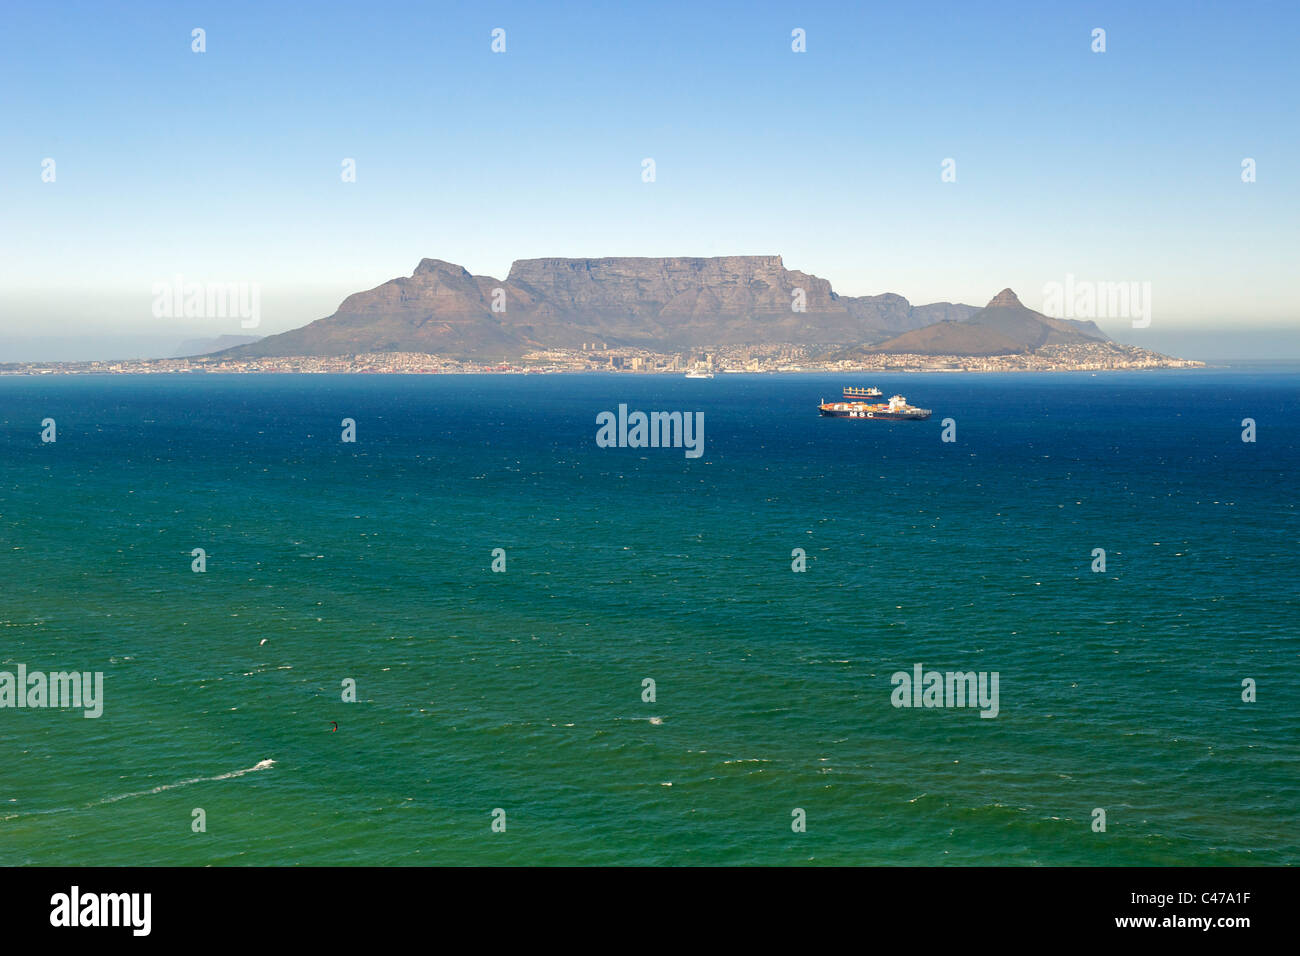 Aerial view across Table Bay showing Table Mountain and the city of Cape Town in South Africa. Stock Photo